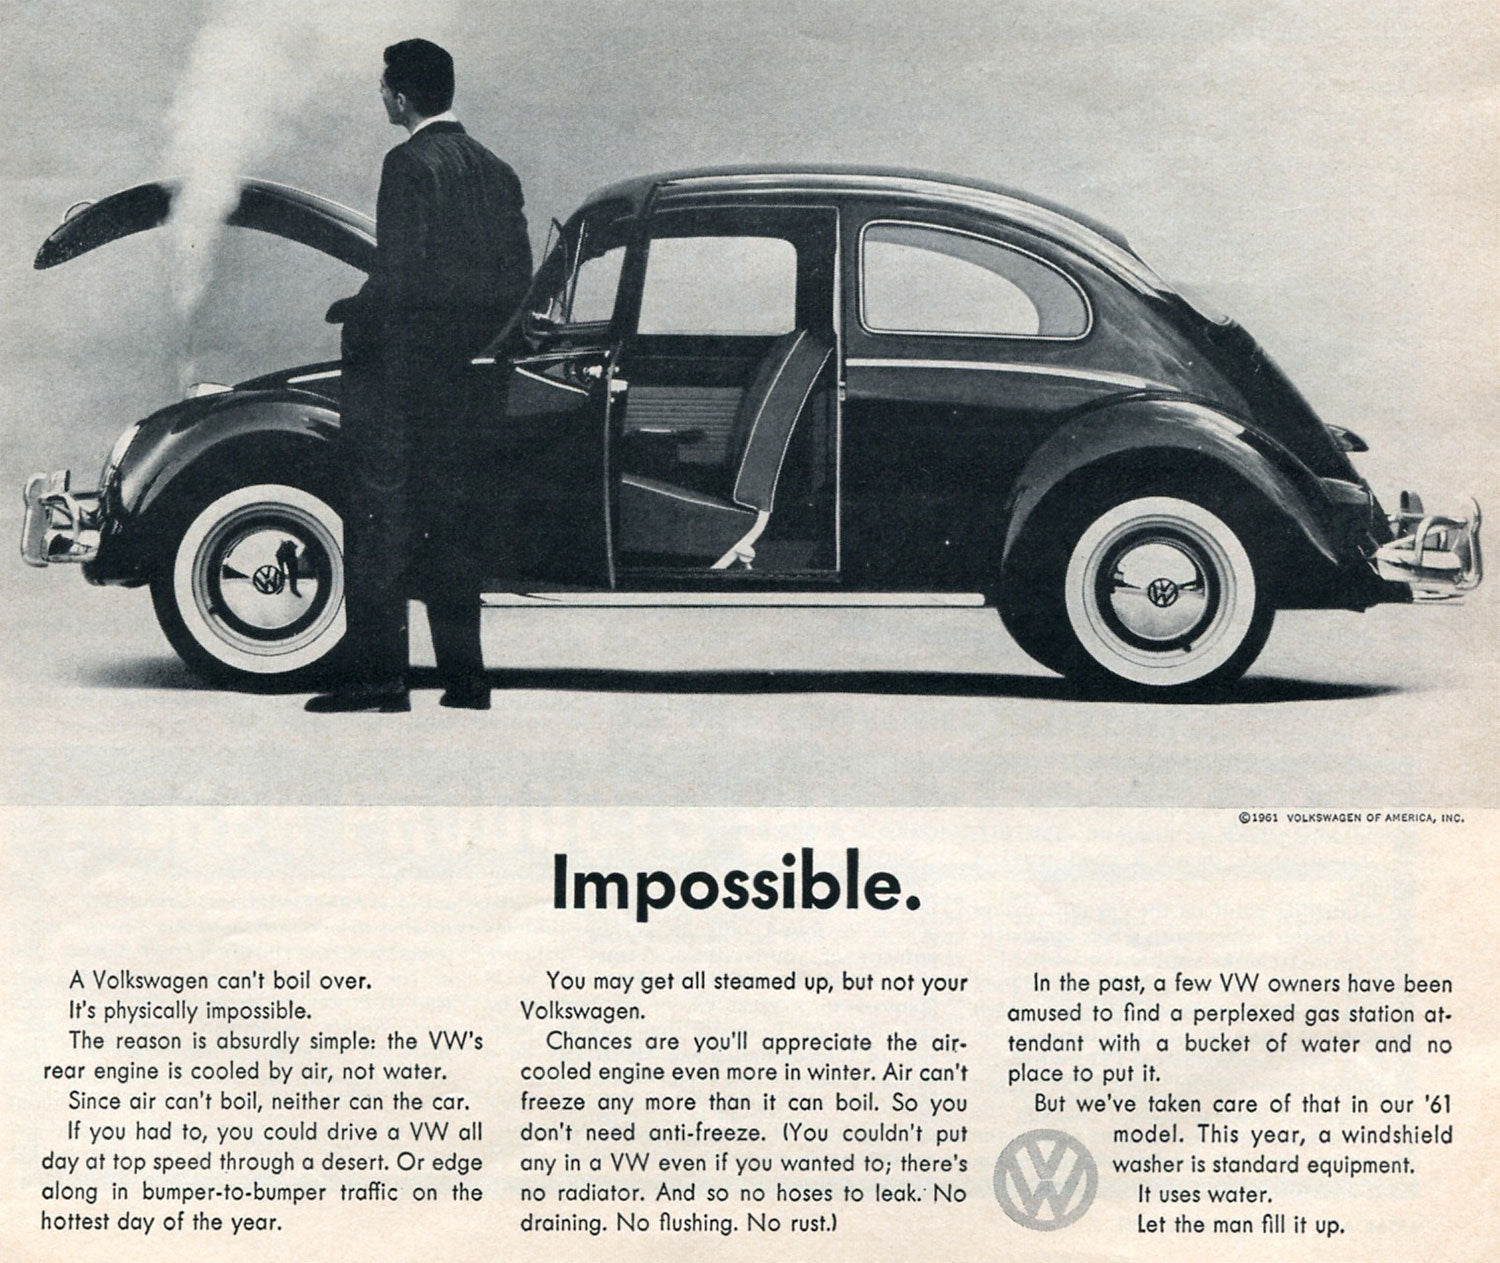 Volkswagen's use of Futura in their 1960s ads for the Beetle